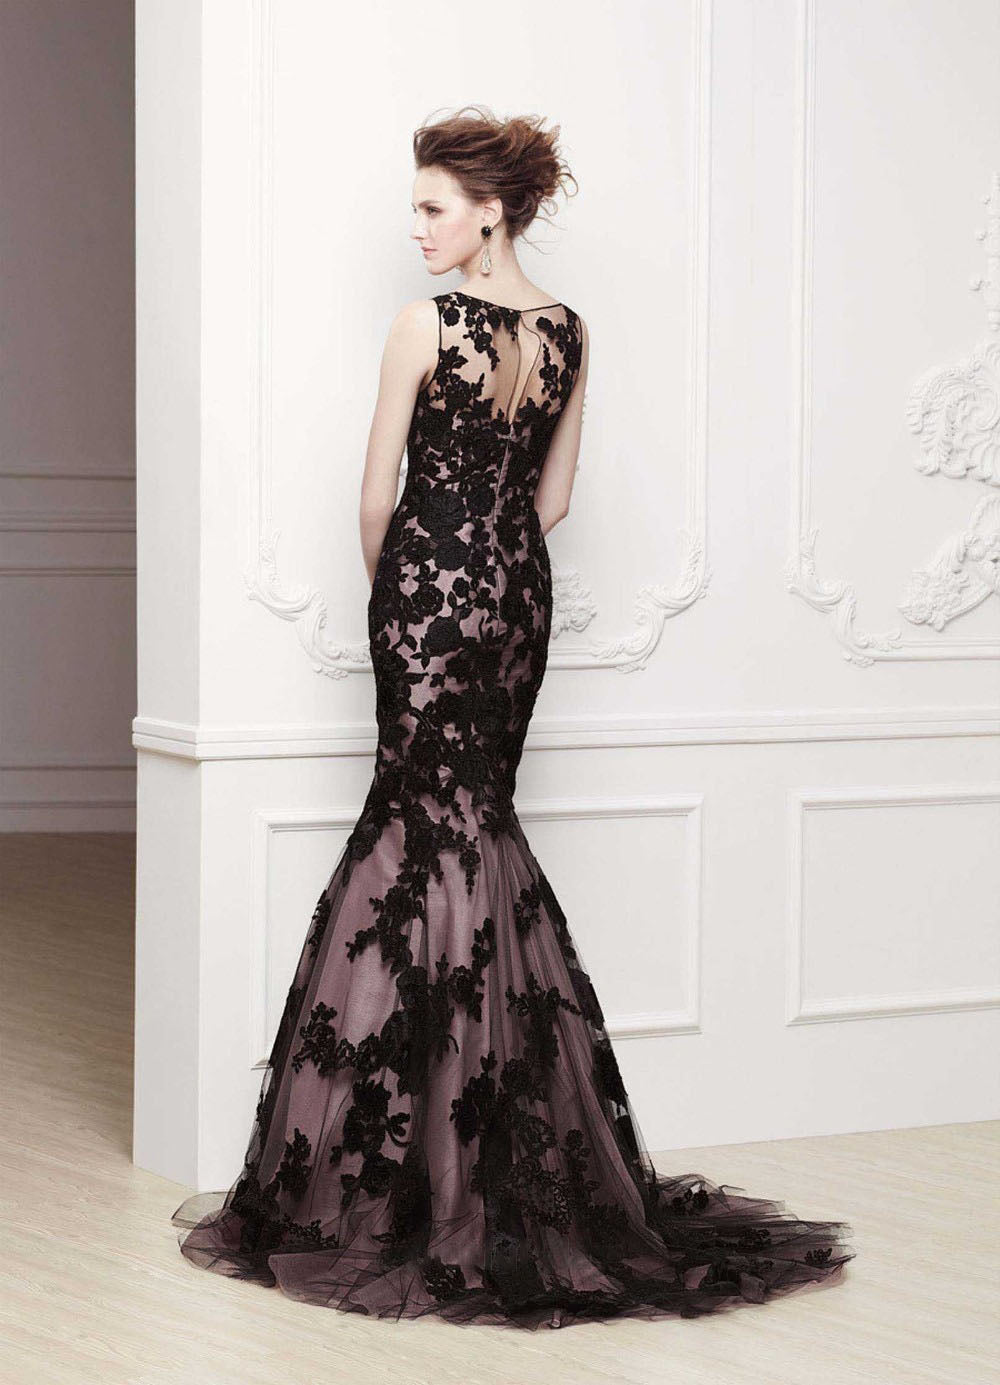 The Aisling :: Strapless Black Lace & Satin Wedding Gown